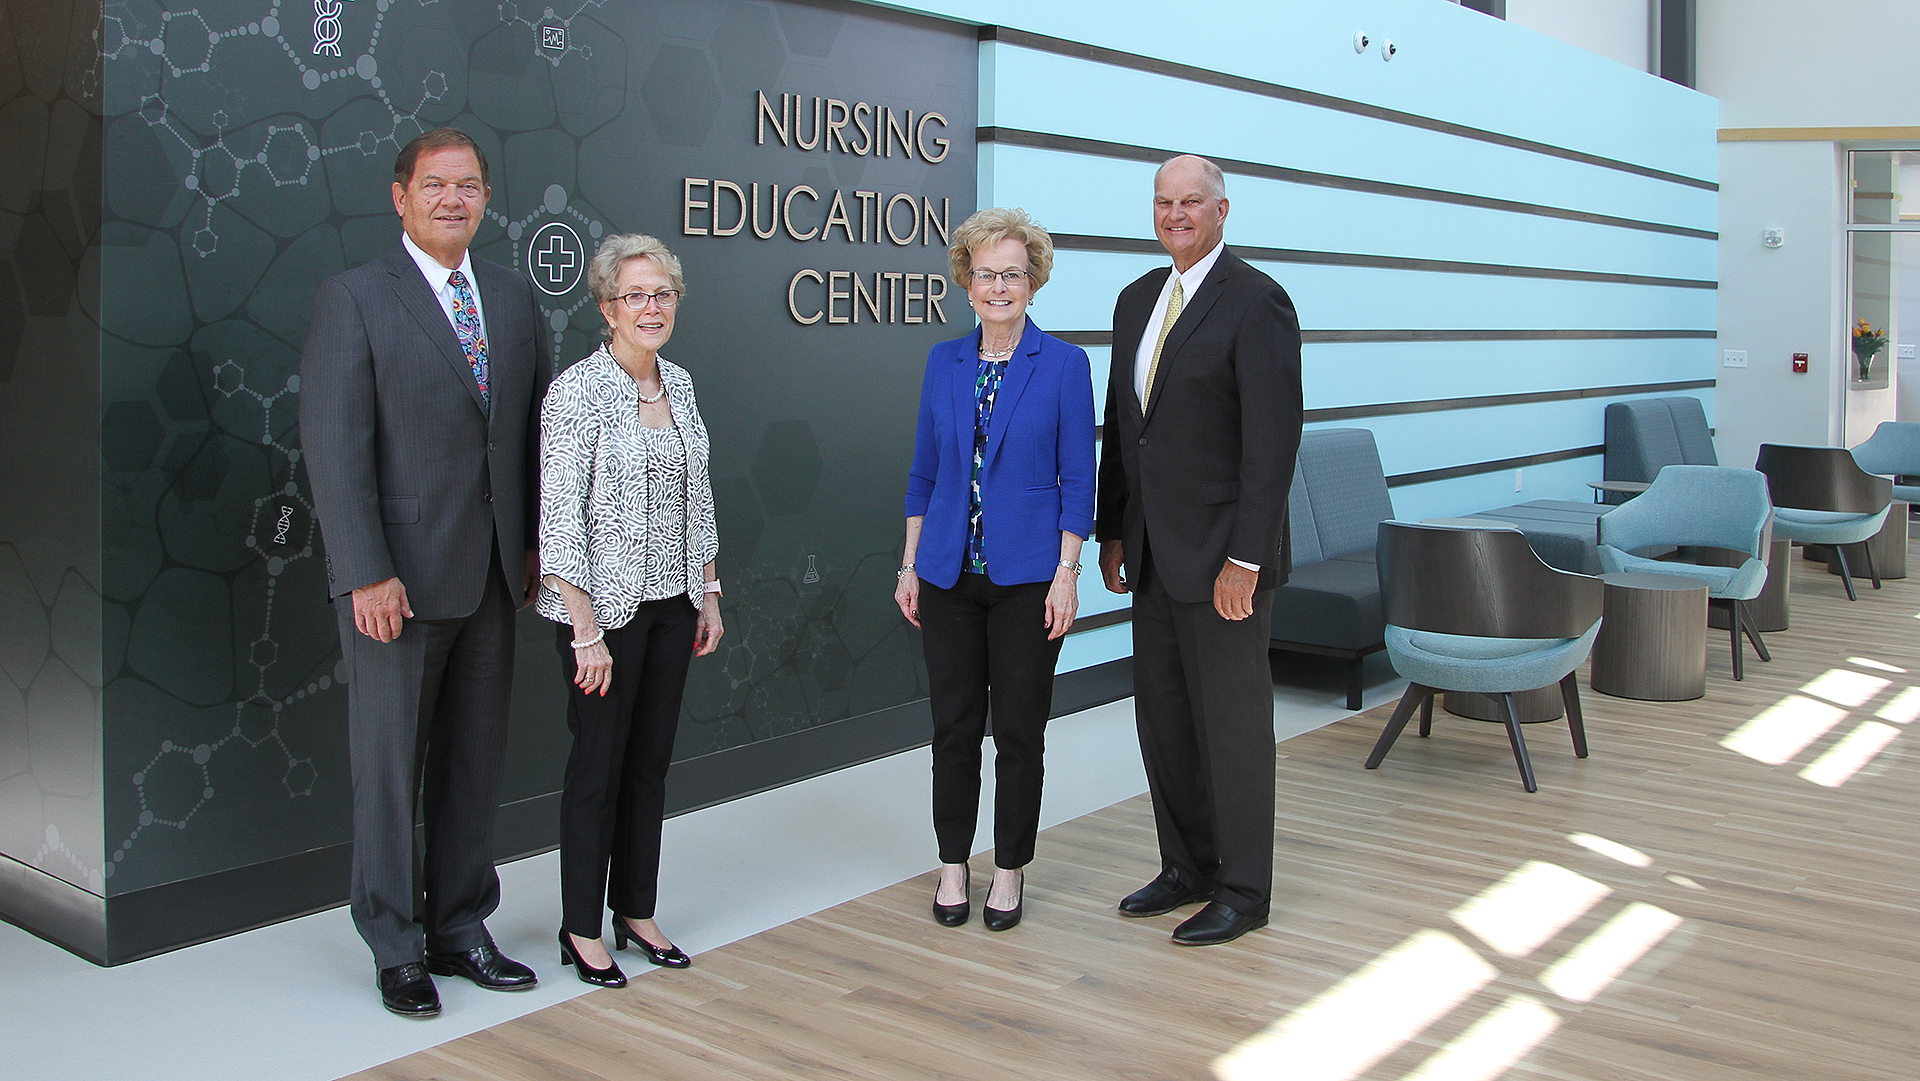 Ed Curtis, president and CEO, and Marsha Prater, senior vice president and chief nursing officer, Memorial Health System; Dr. Charlotte Warren, president, and Ken Elmore, chair, Board of Trustees, Lincoln Land Community College in the new LLCC Nursing Education Center, a partnership with Memorial Health System.